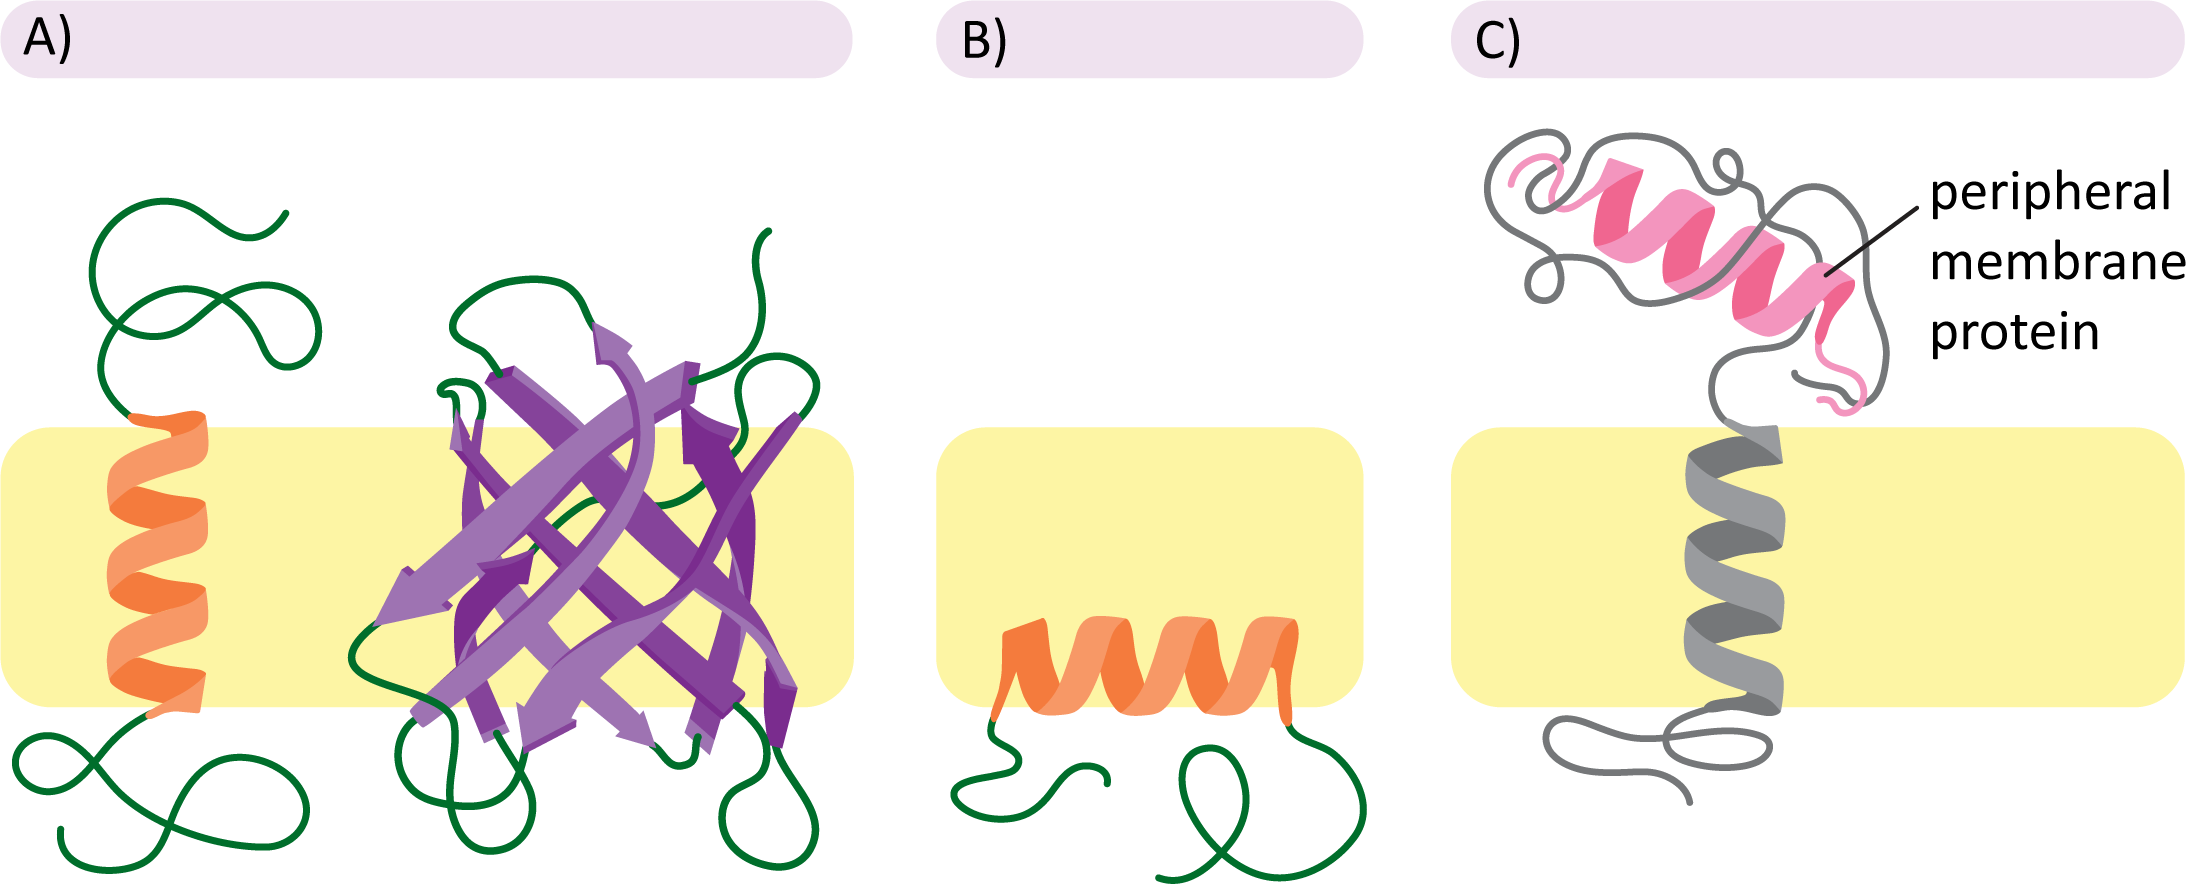 Examples of integral and peripheral membrane proteins on a biological membrane.